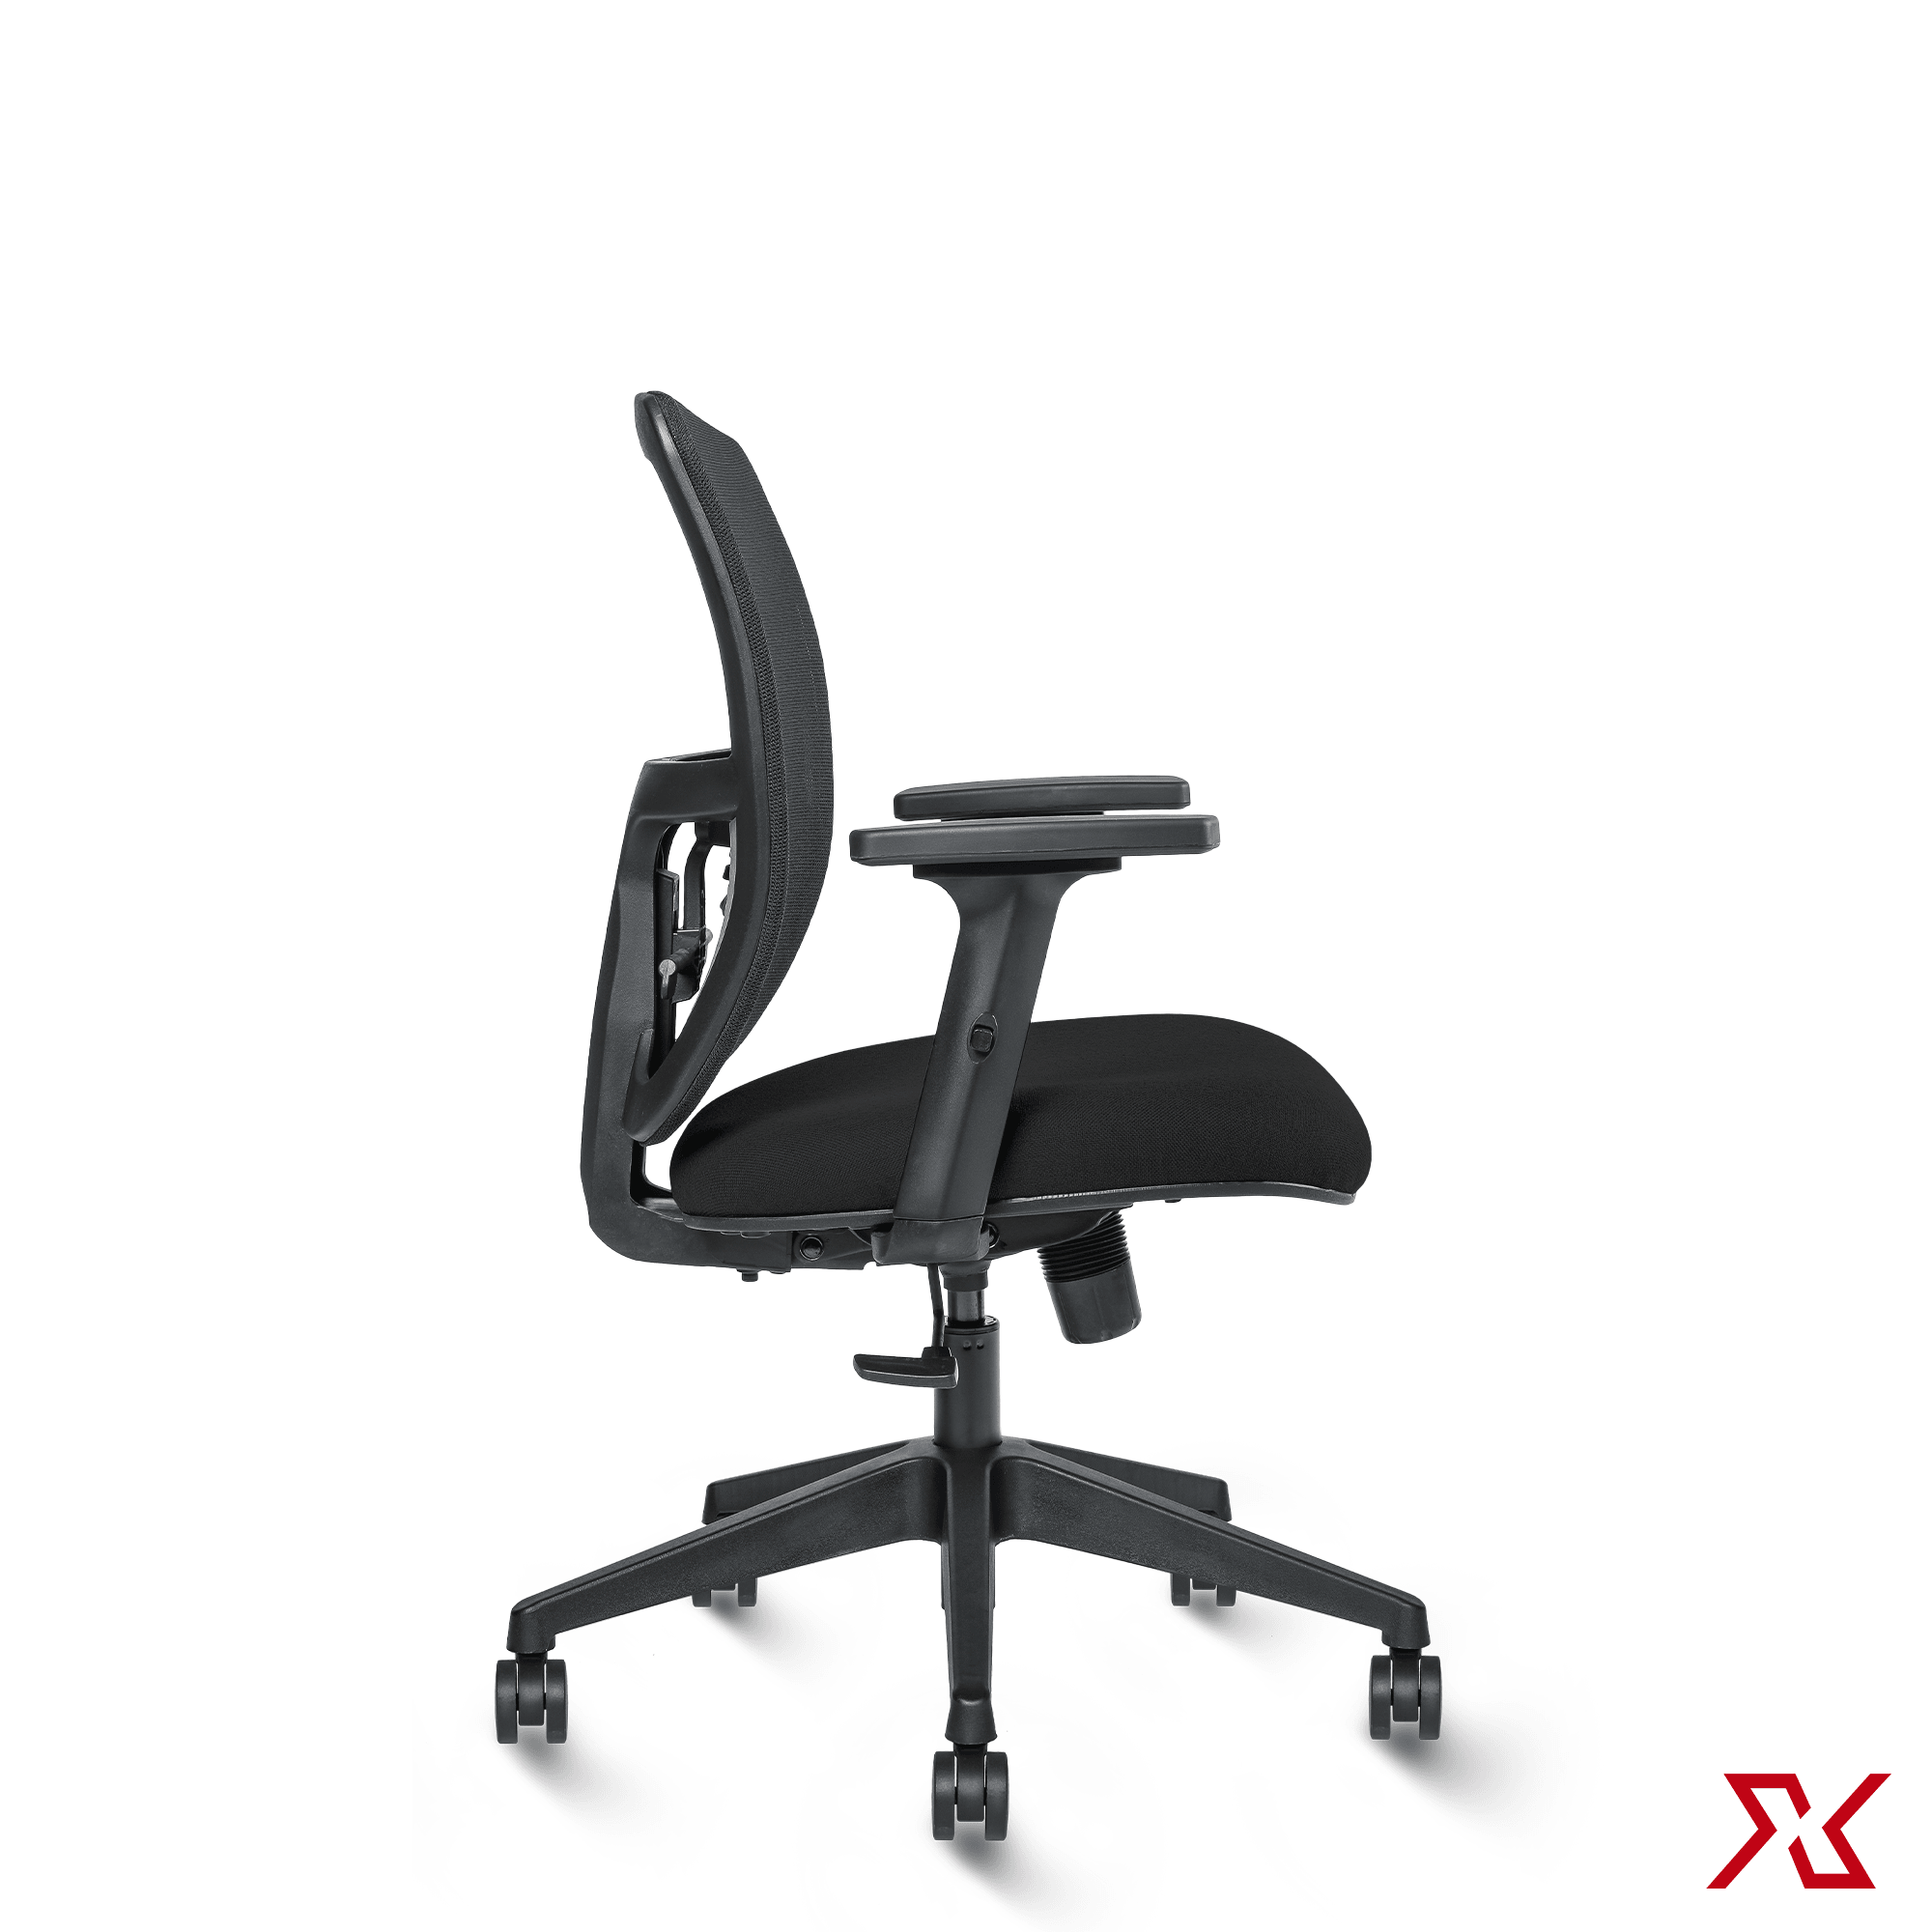 STORM Medium Back LX (Black Chair) - Exclusiff Seating Sytems